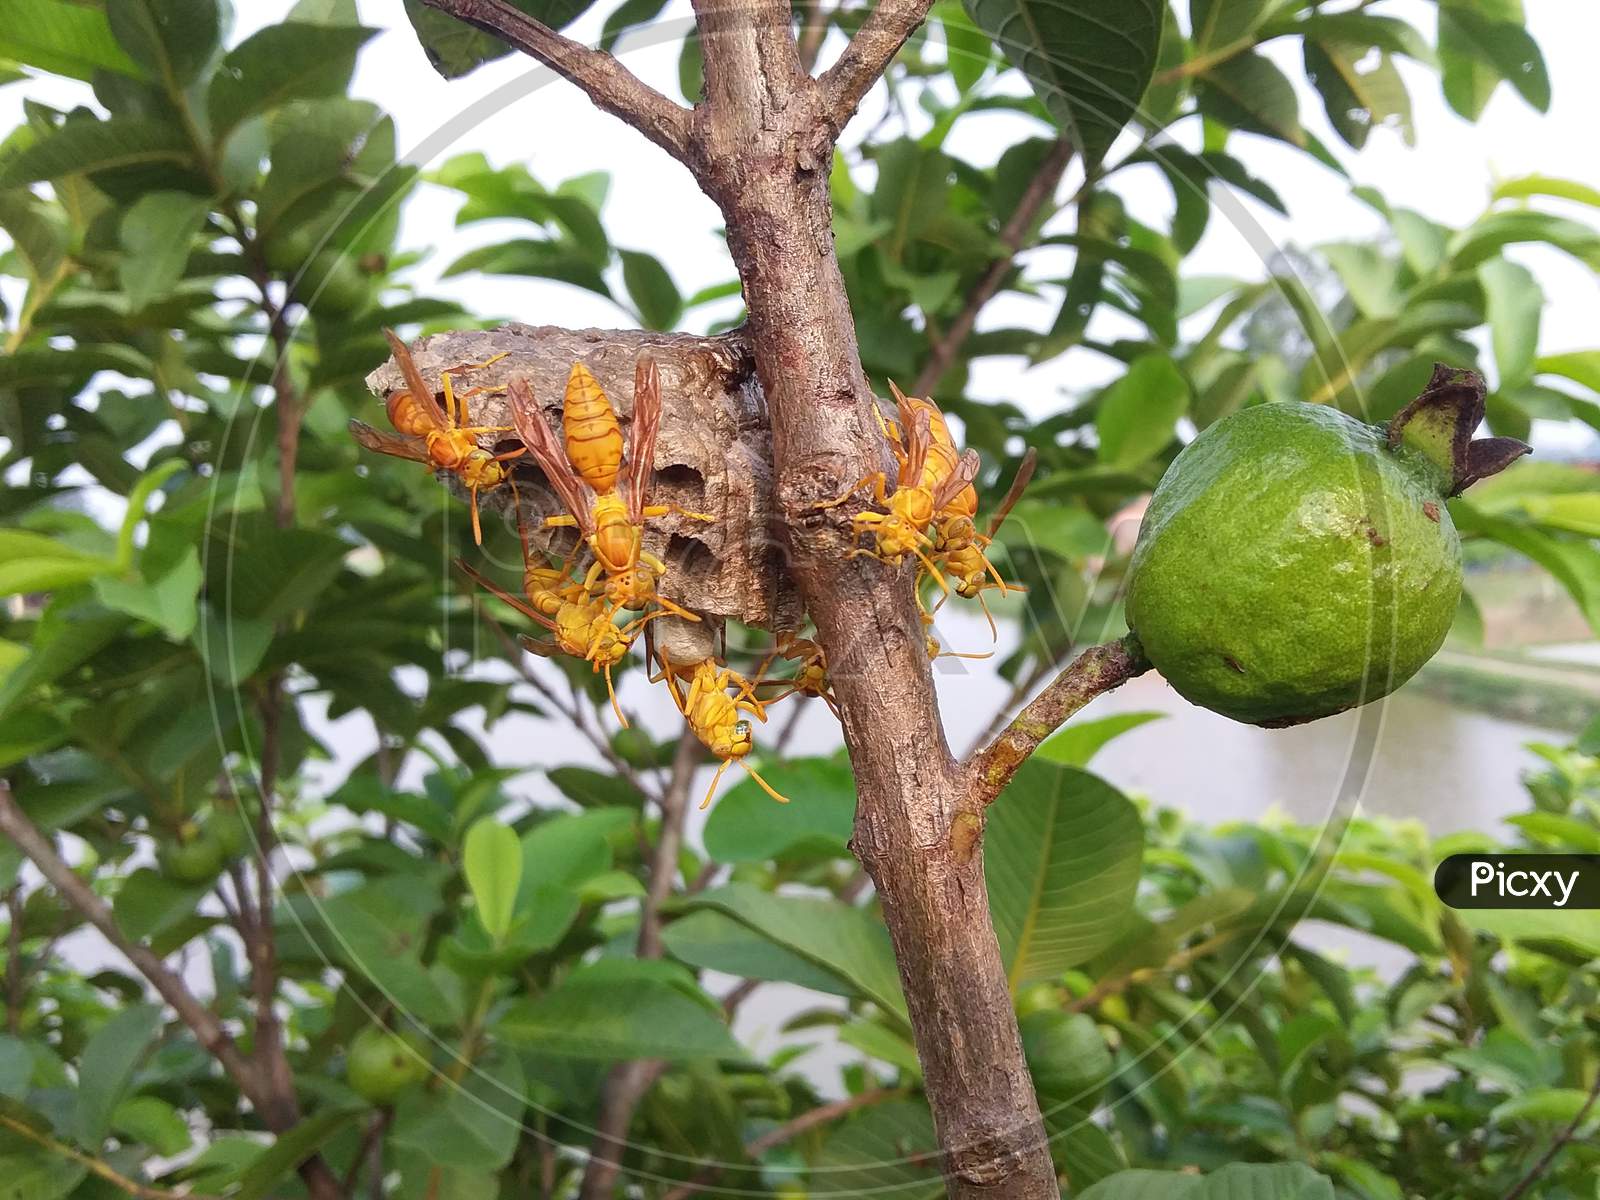 The wasp is living in a nest on the branch of the guava tree.